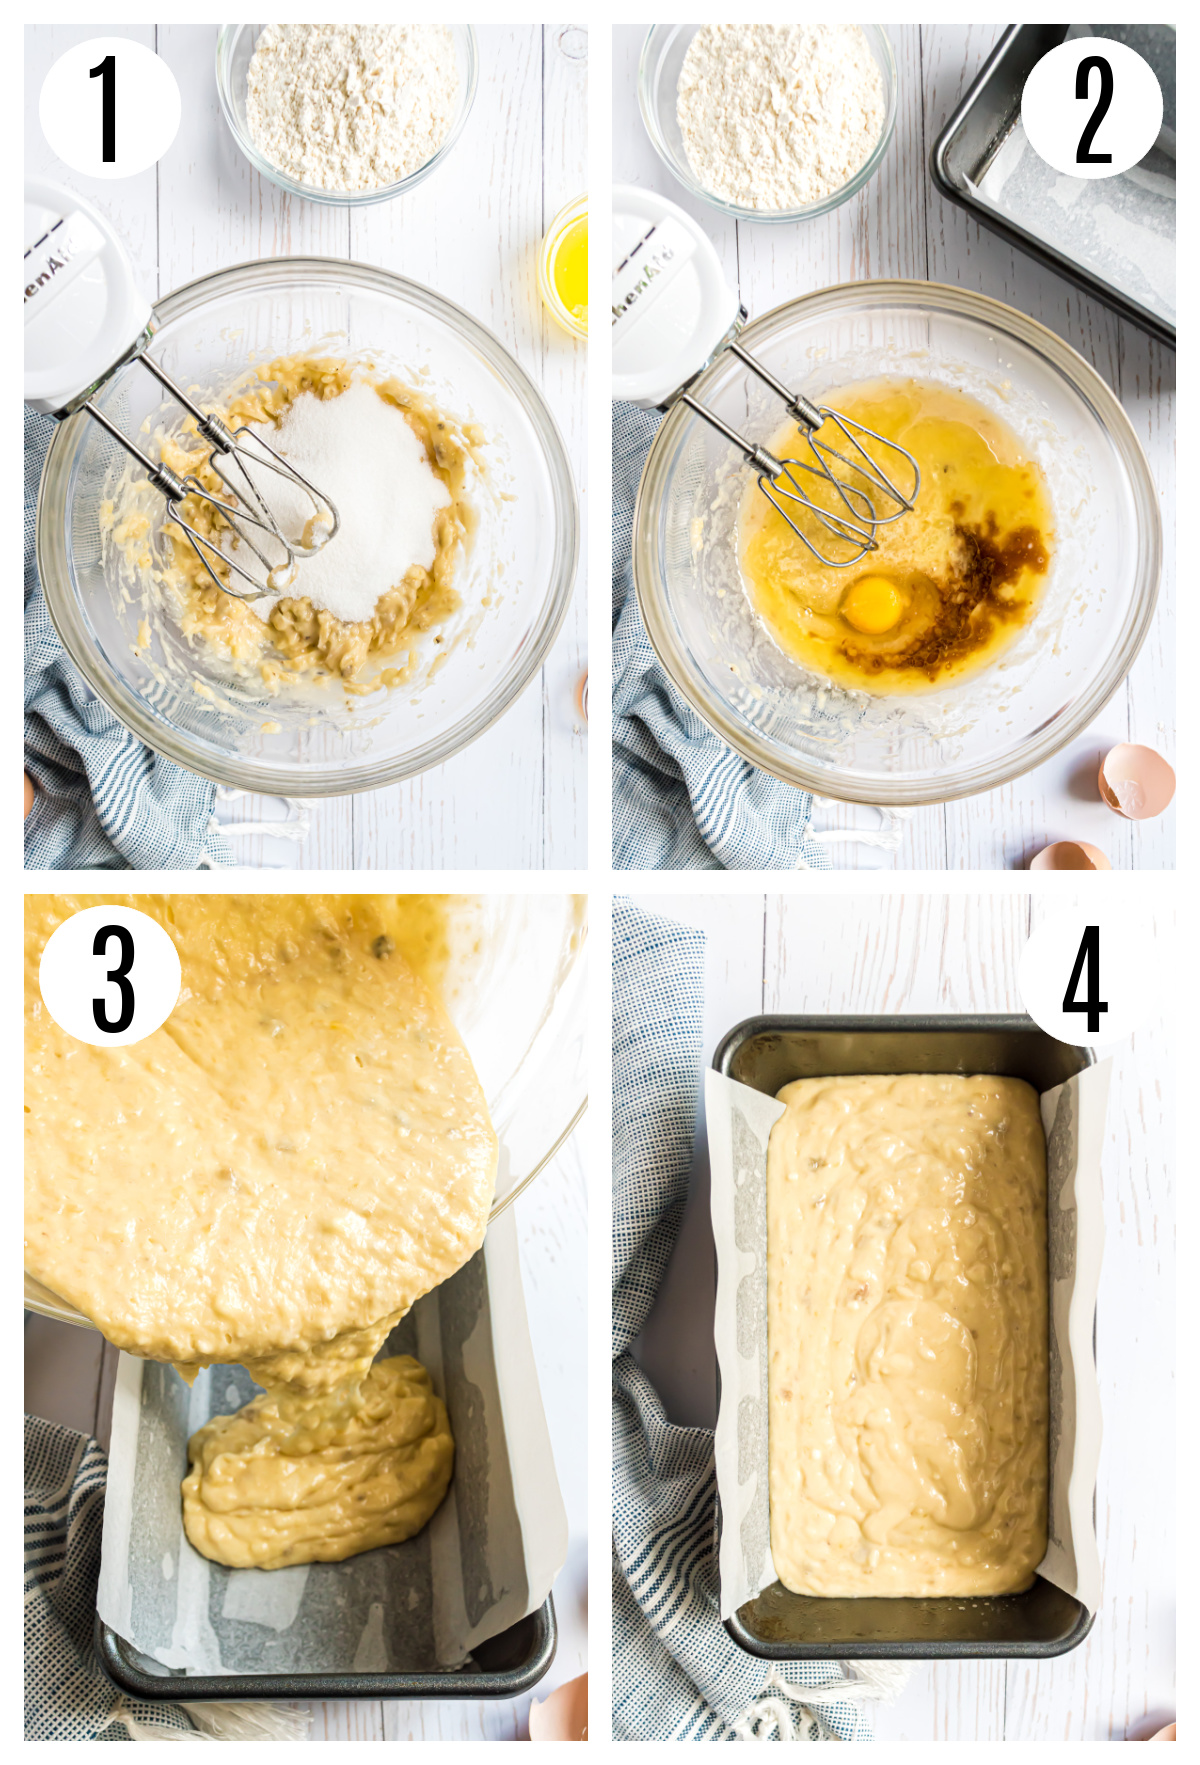 The steps to make the banana bread with self-rising flour include: mashing the bananas, mixing in the sugar, adding the egg, vanilla and sour cream, stirring in the self-rising flour and pouring the batter into the loaf pan.